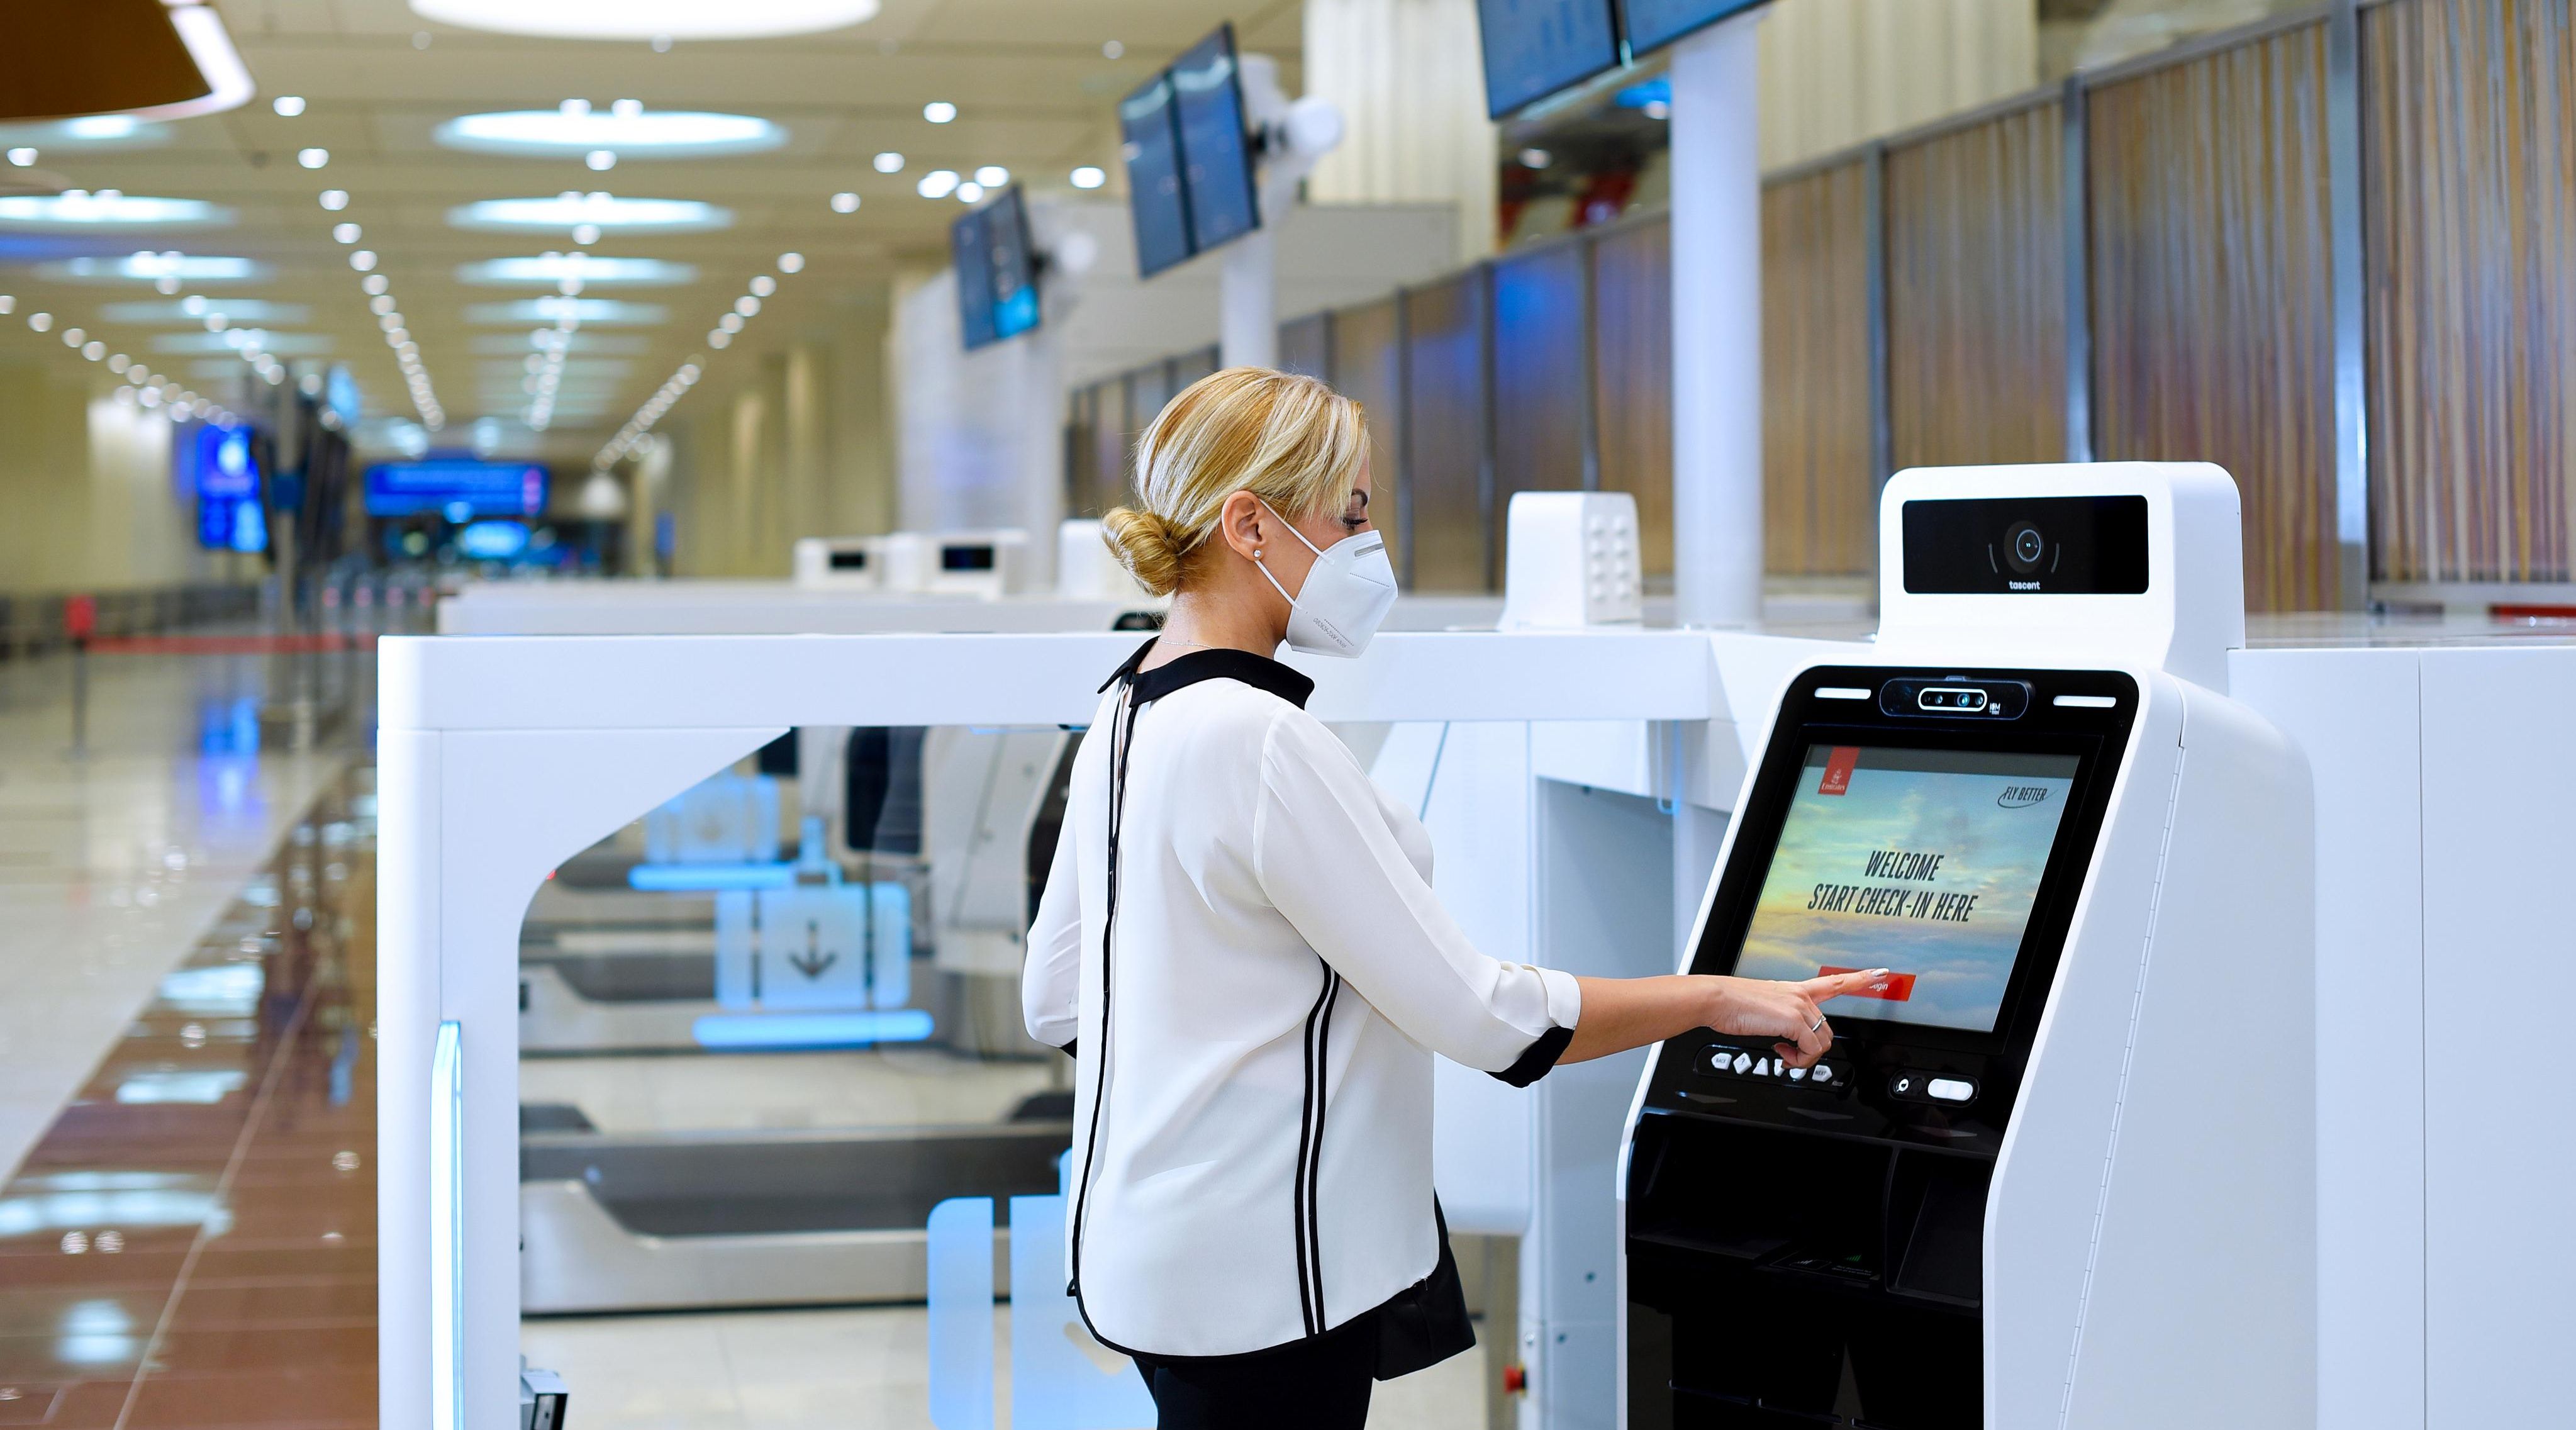 Self-check kiosks by Emirates Airlines at Dubai airport set to enhance the experience